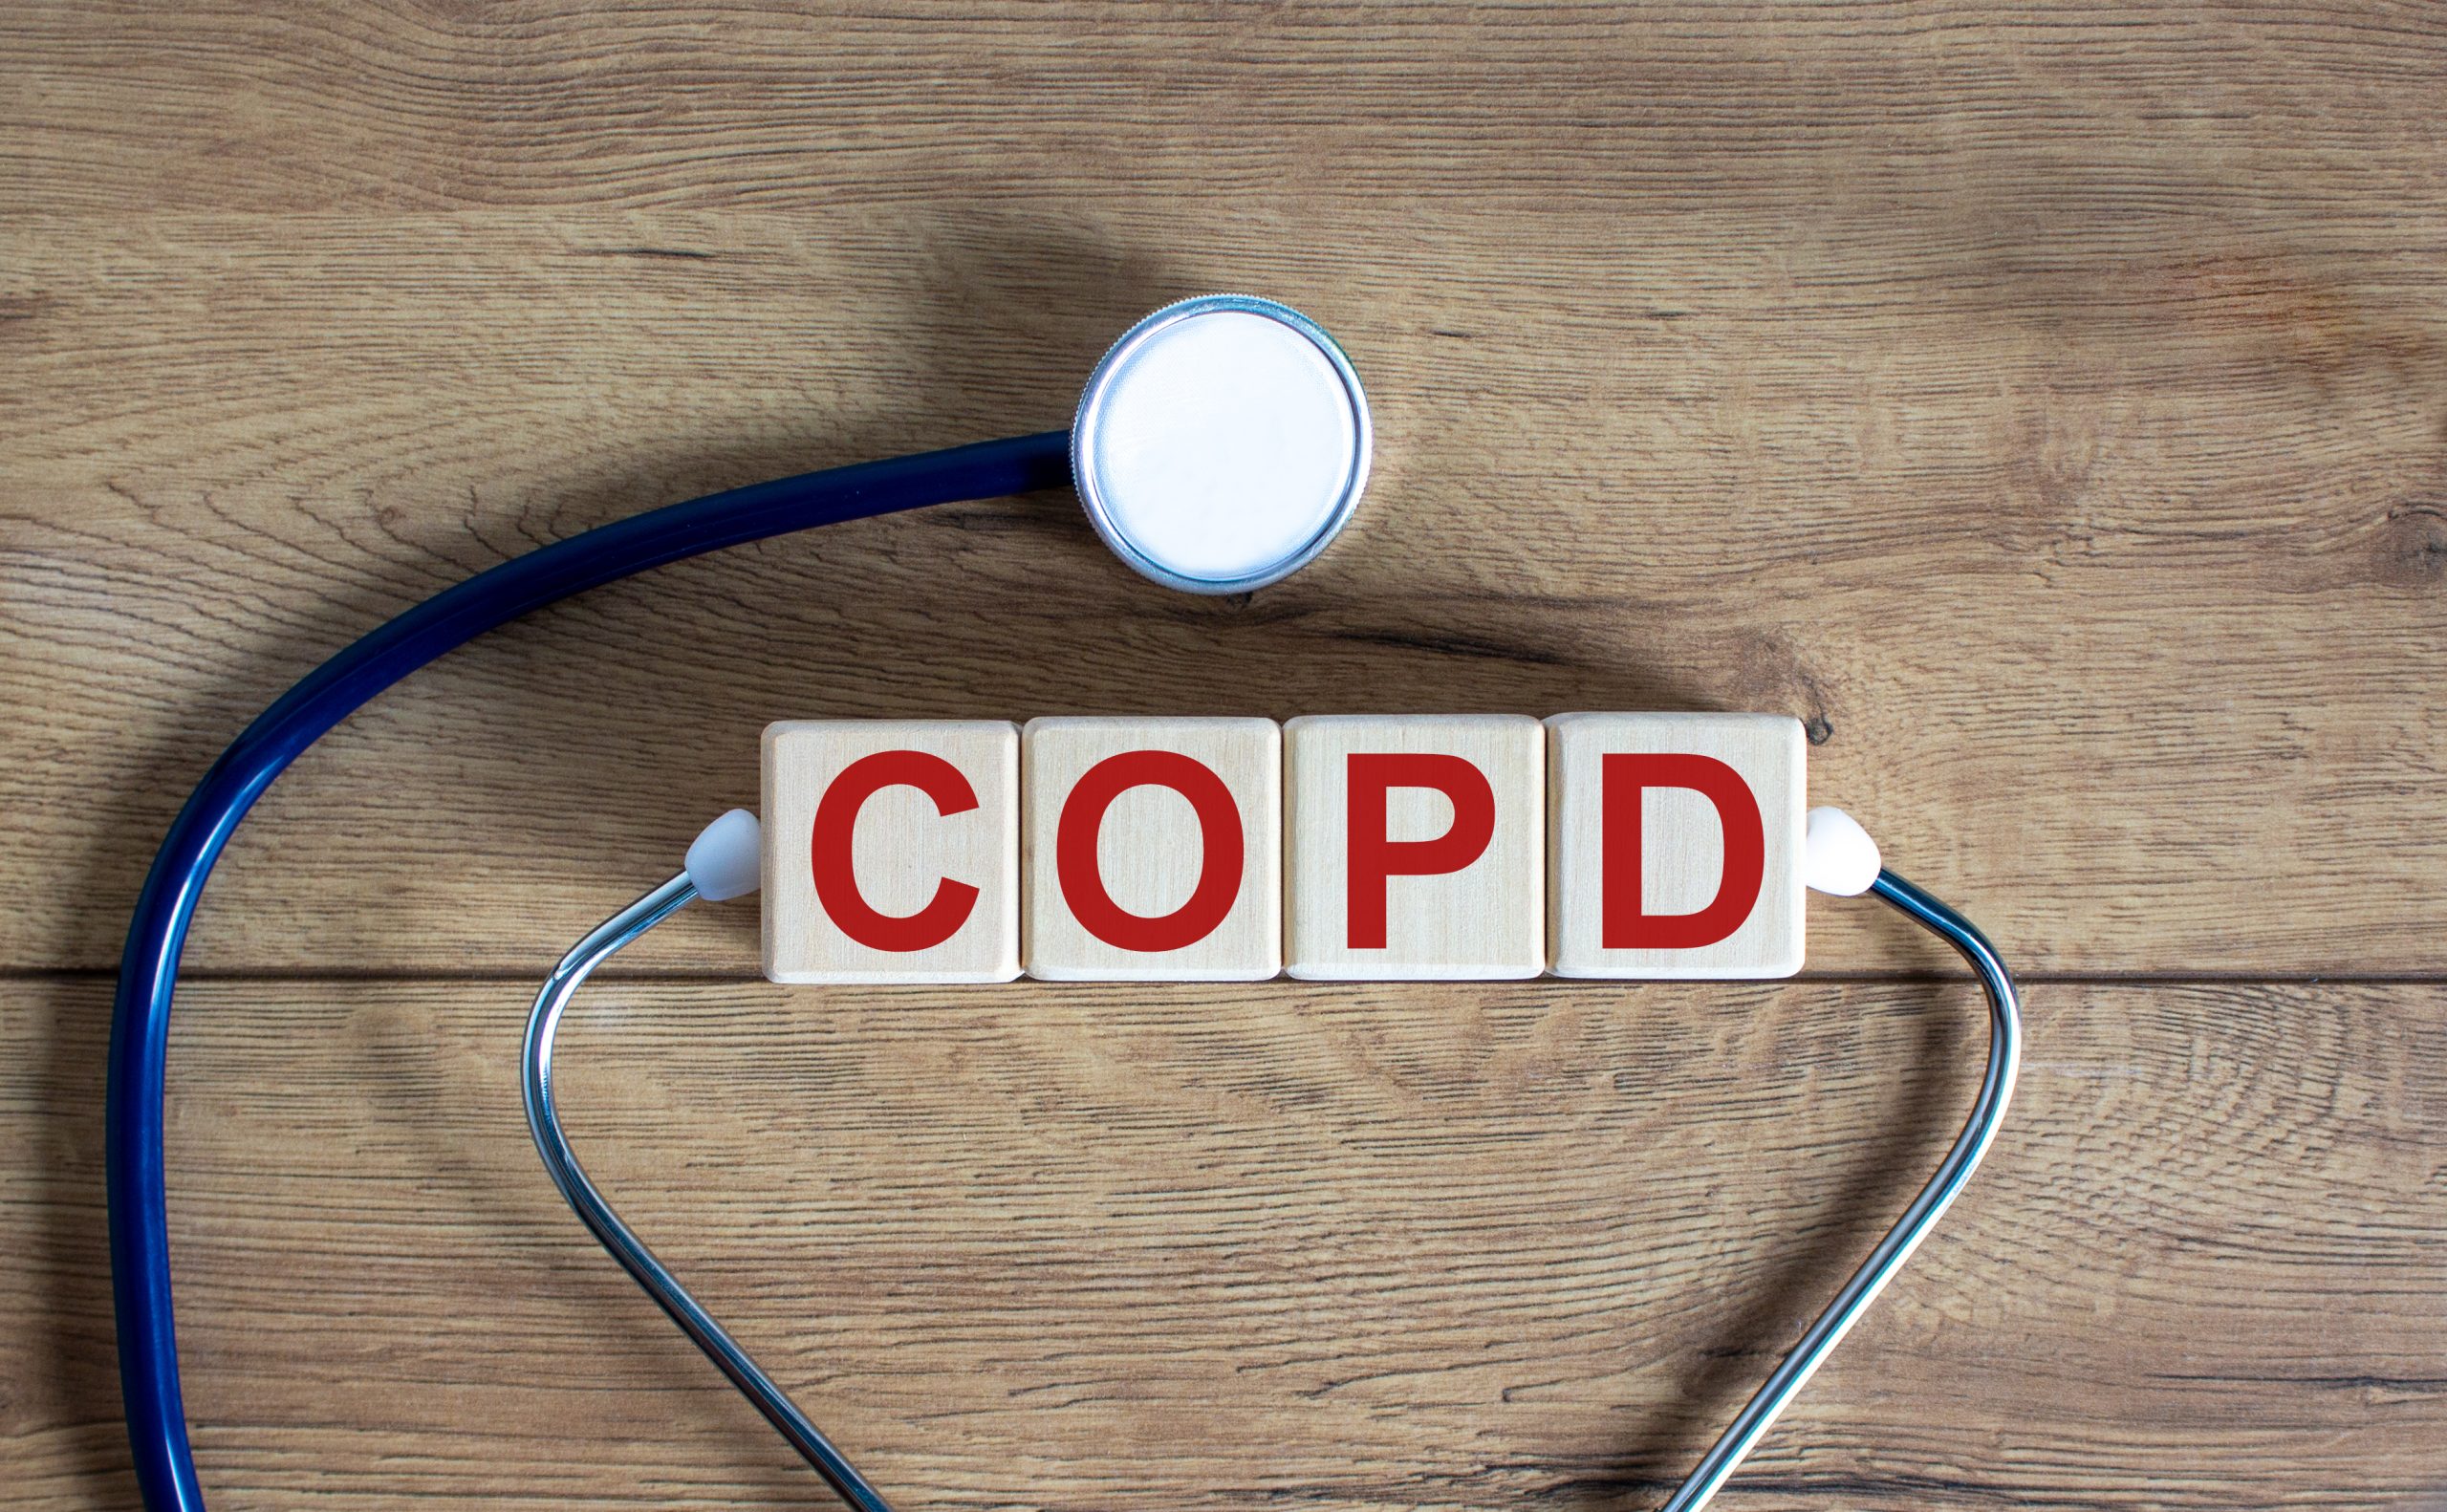 COPD medical concept. Wooden cubes with the inscription 'COPD - chronic obstructive pulmonary disease', stethoscope. Beautiful wooden background. Copy space.